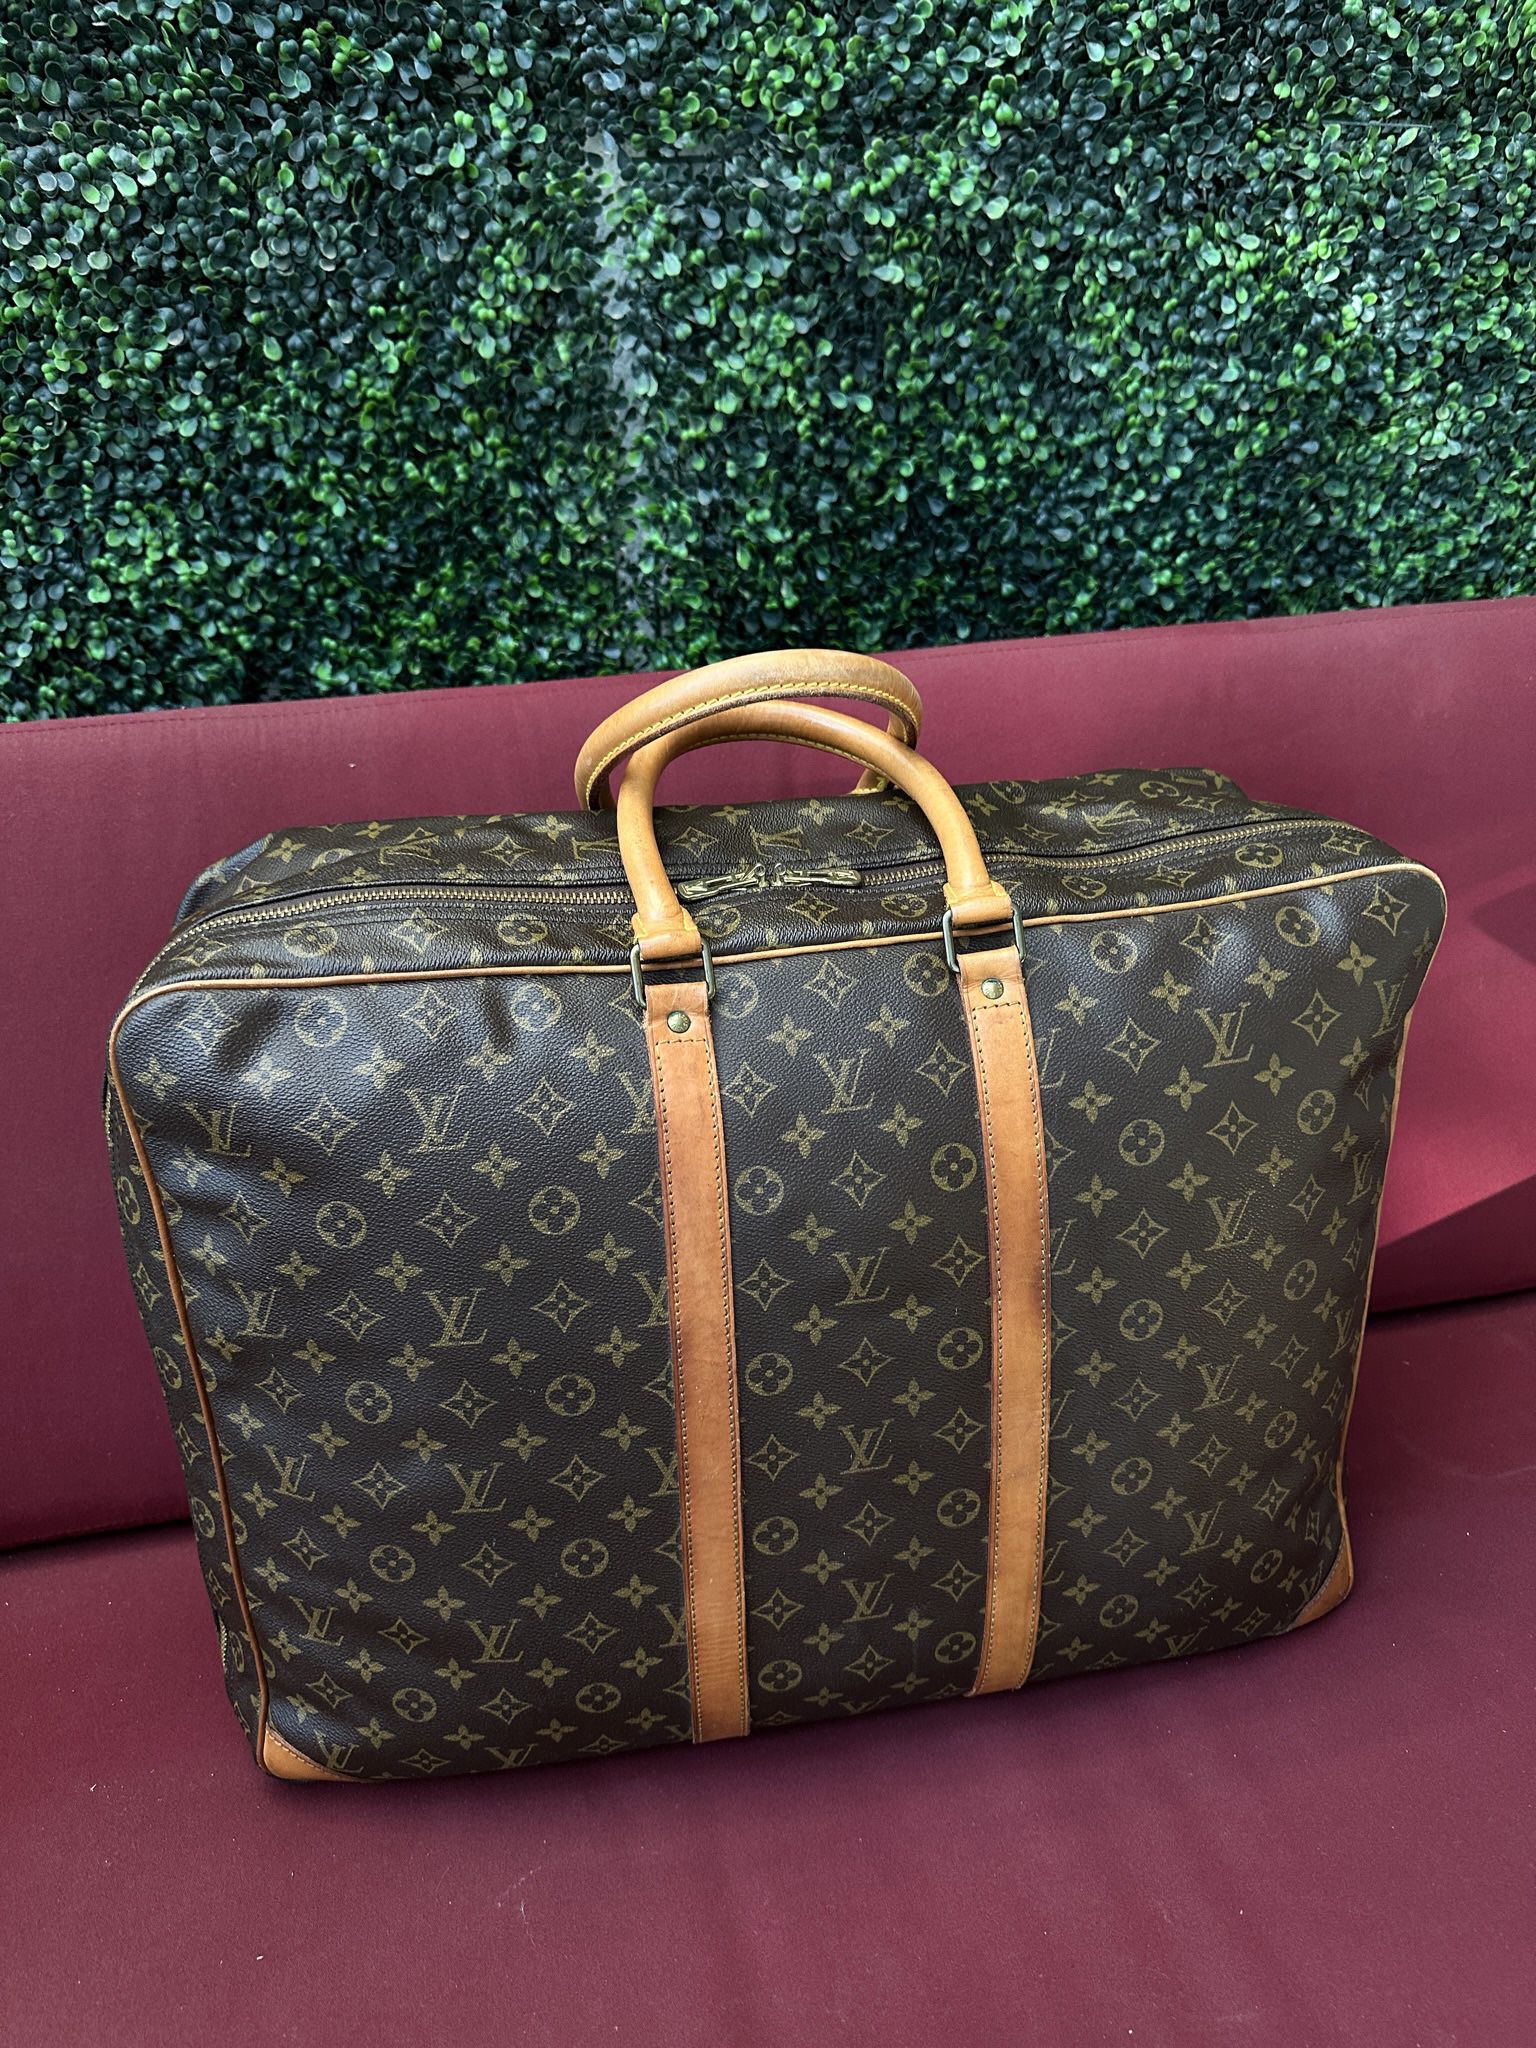 Vintage Louis Vuitton Travel Suitcase Sirius 55 for Sale in